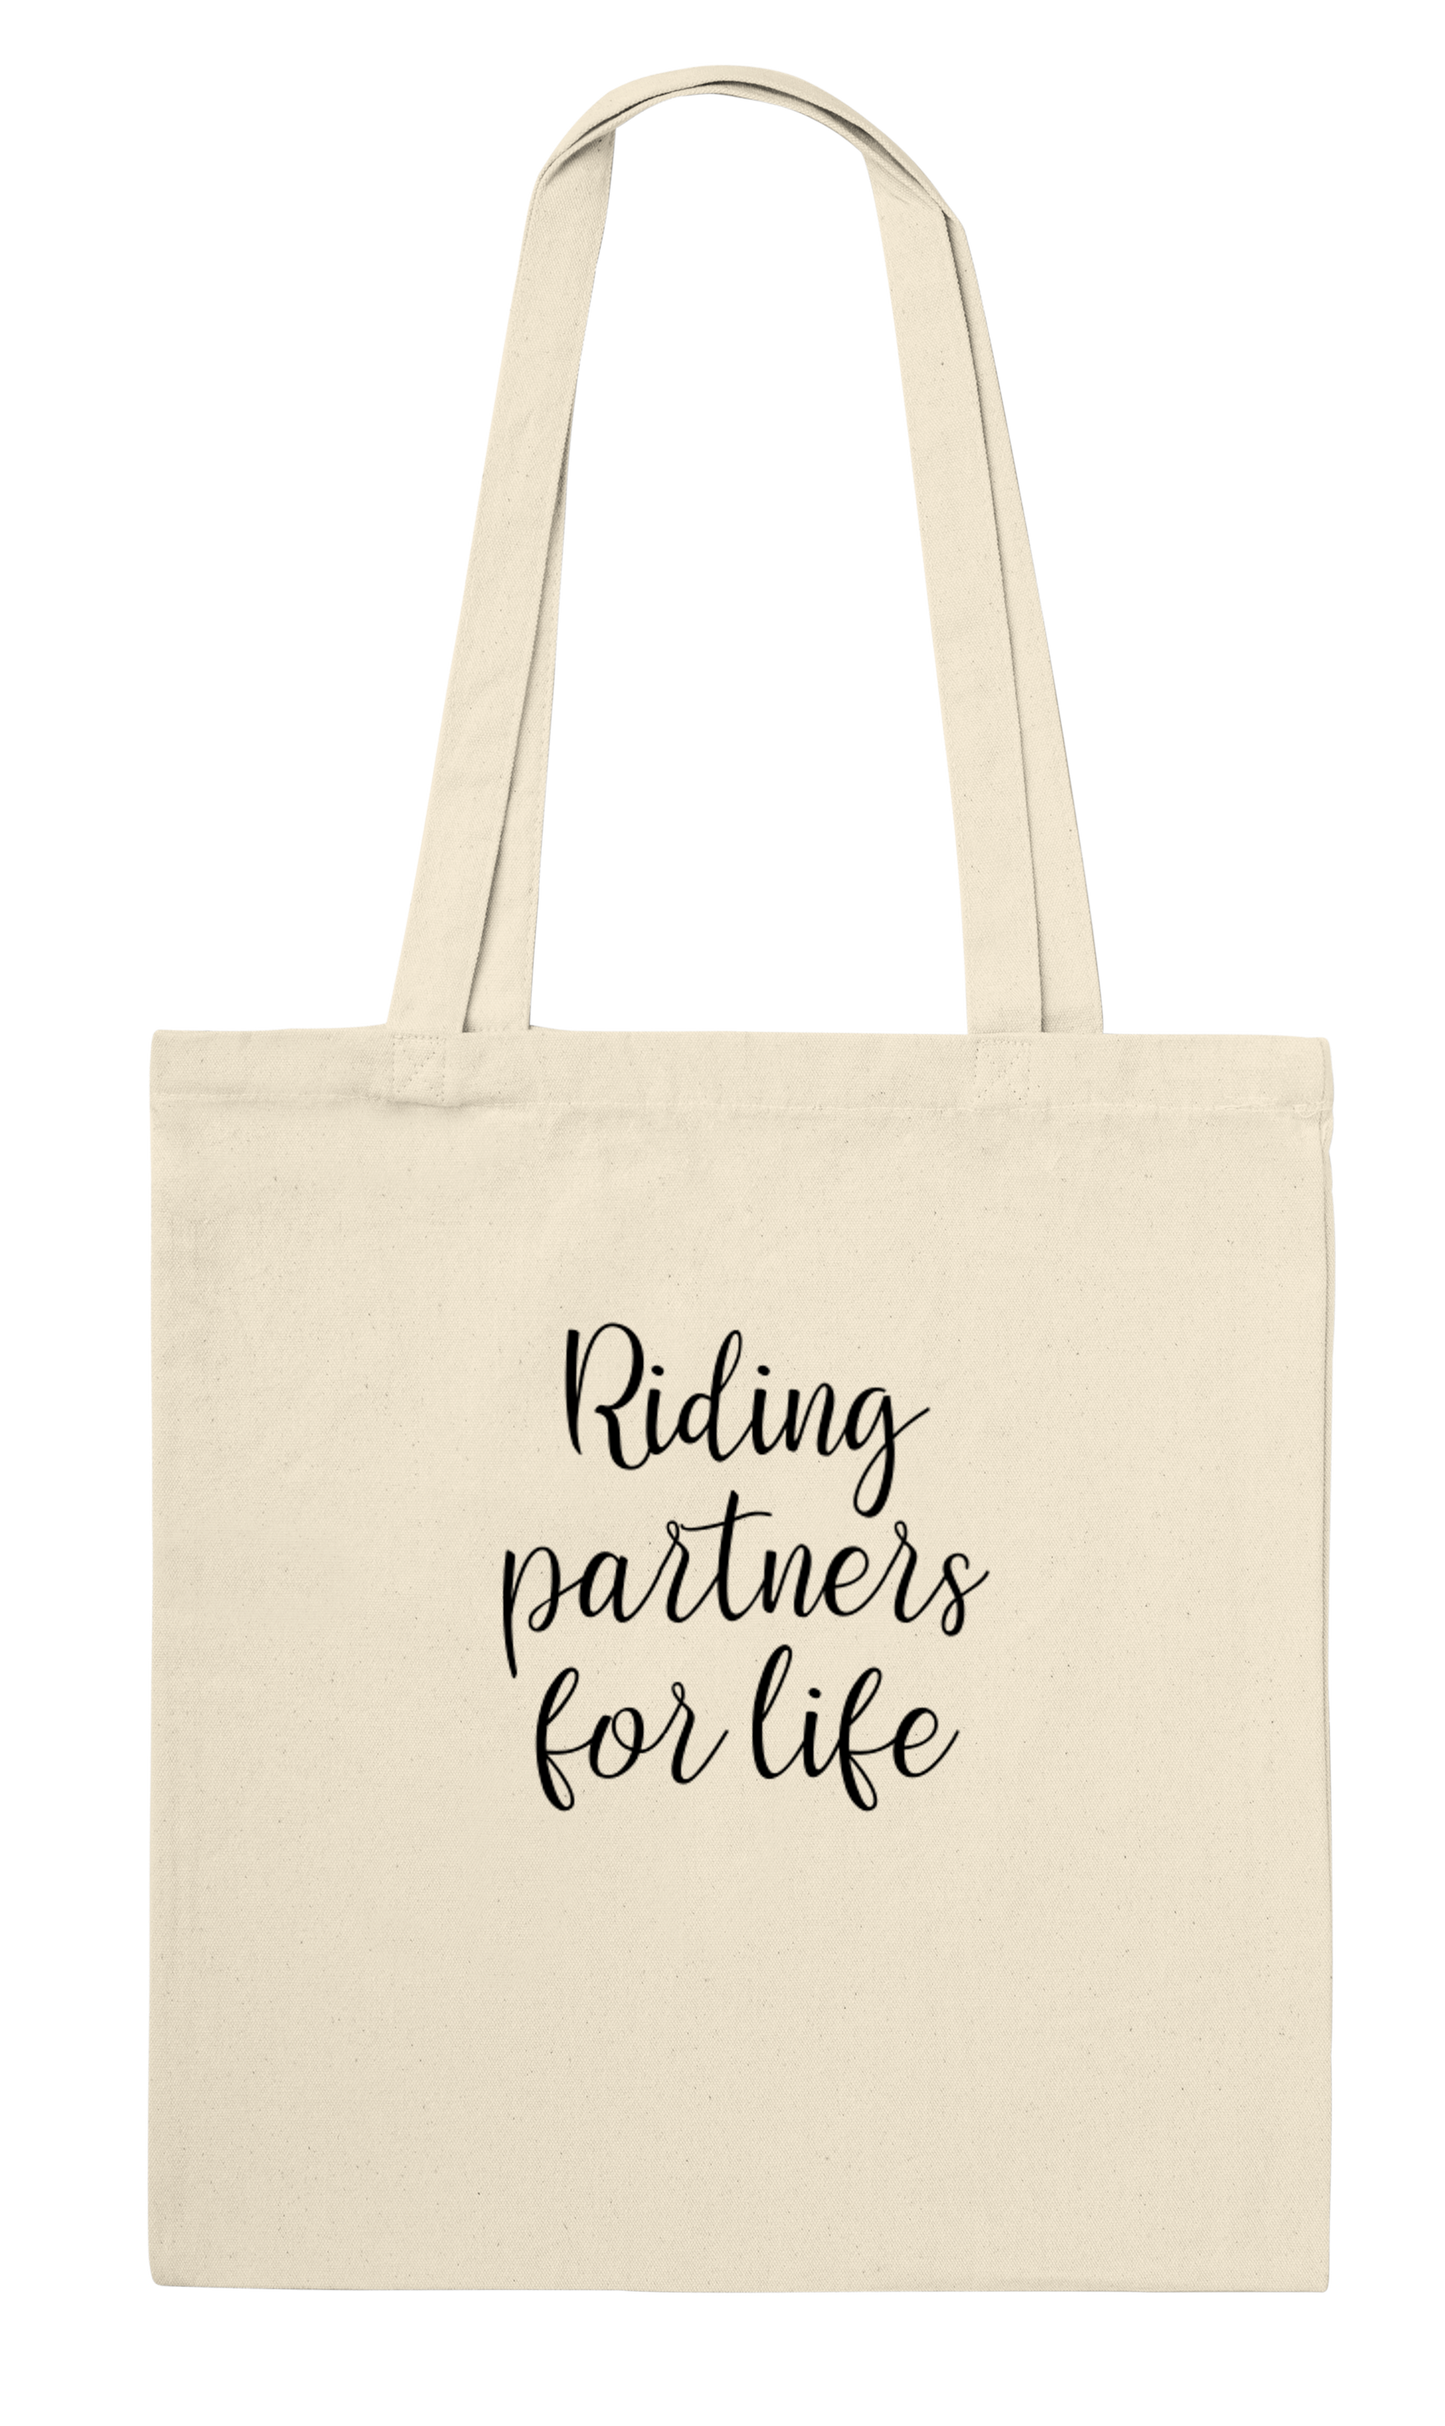 Hand Drawn Horse || Tote Bag - Design: "FREEDOM"; Static Design; Personalizable Text